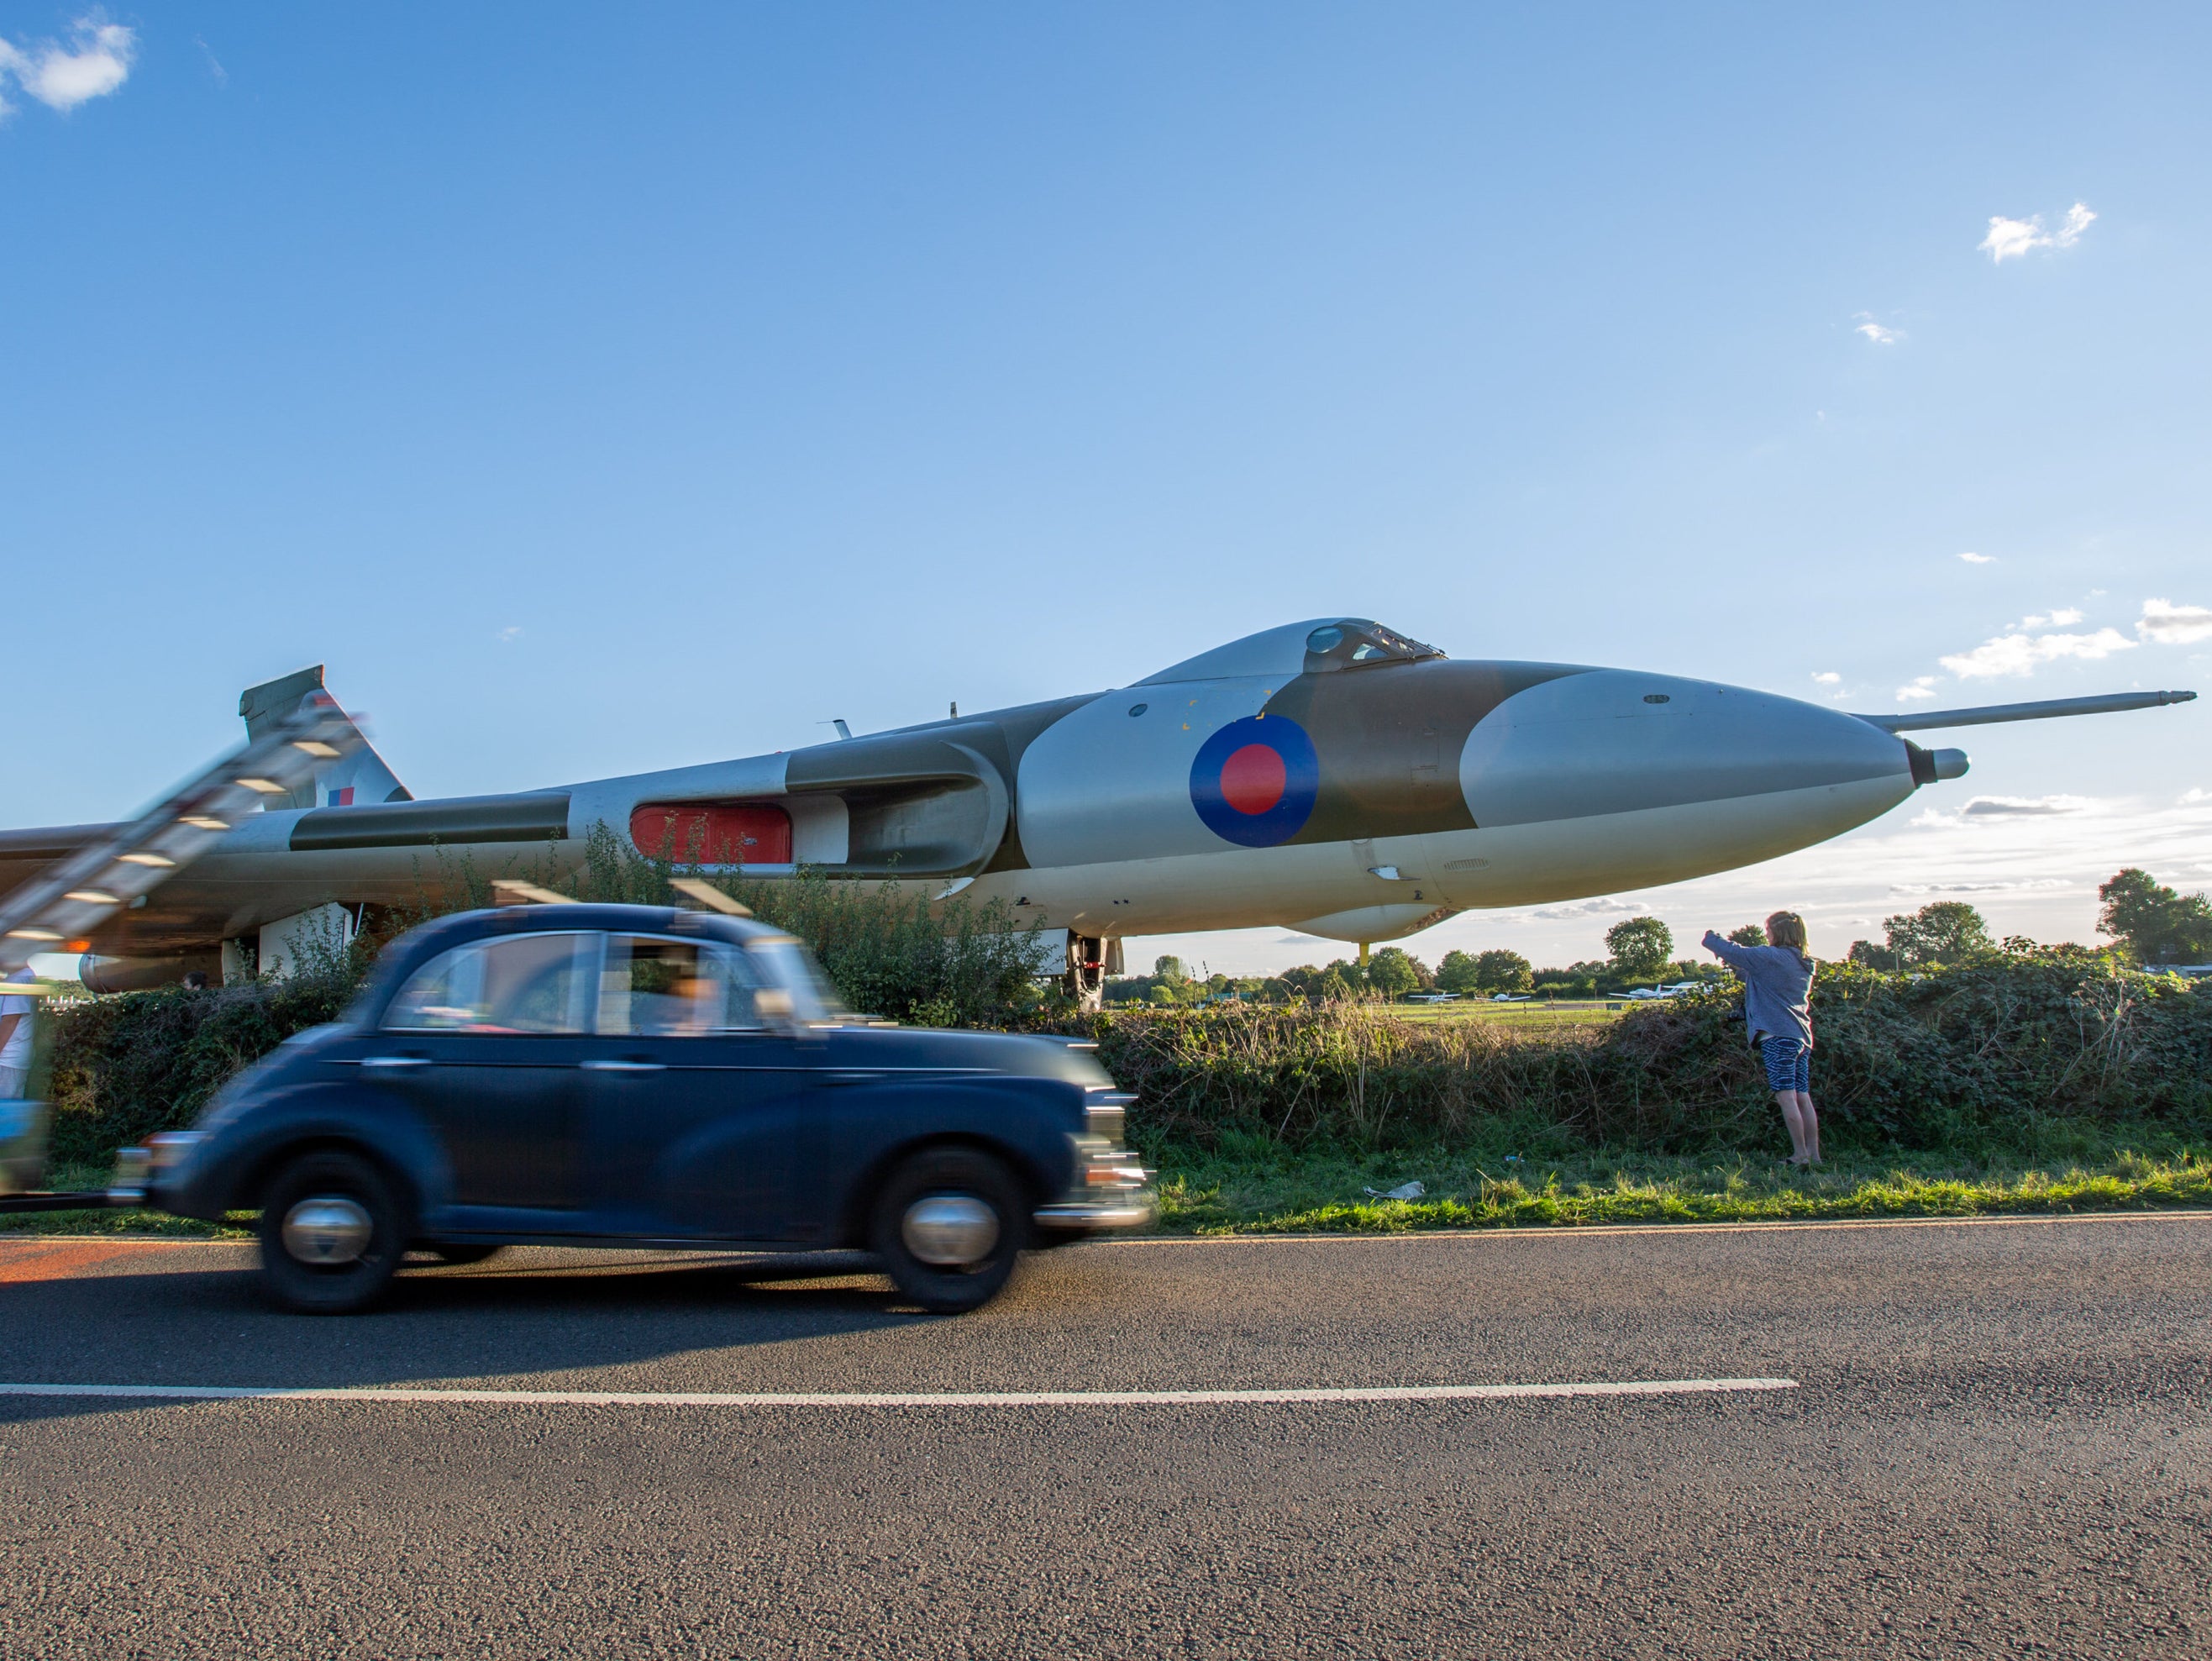 The scene at Wellesbourne Airfield where a Vulcan bomber plane slipped off the runway